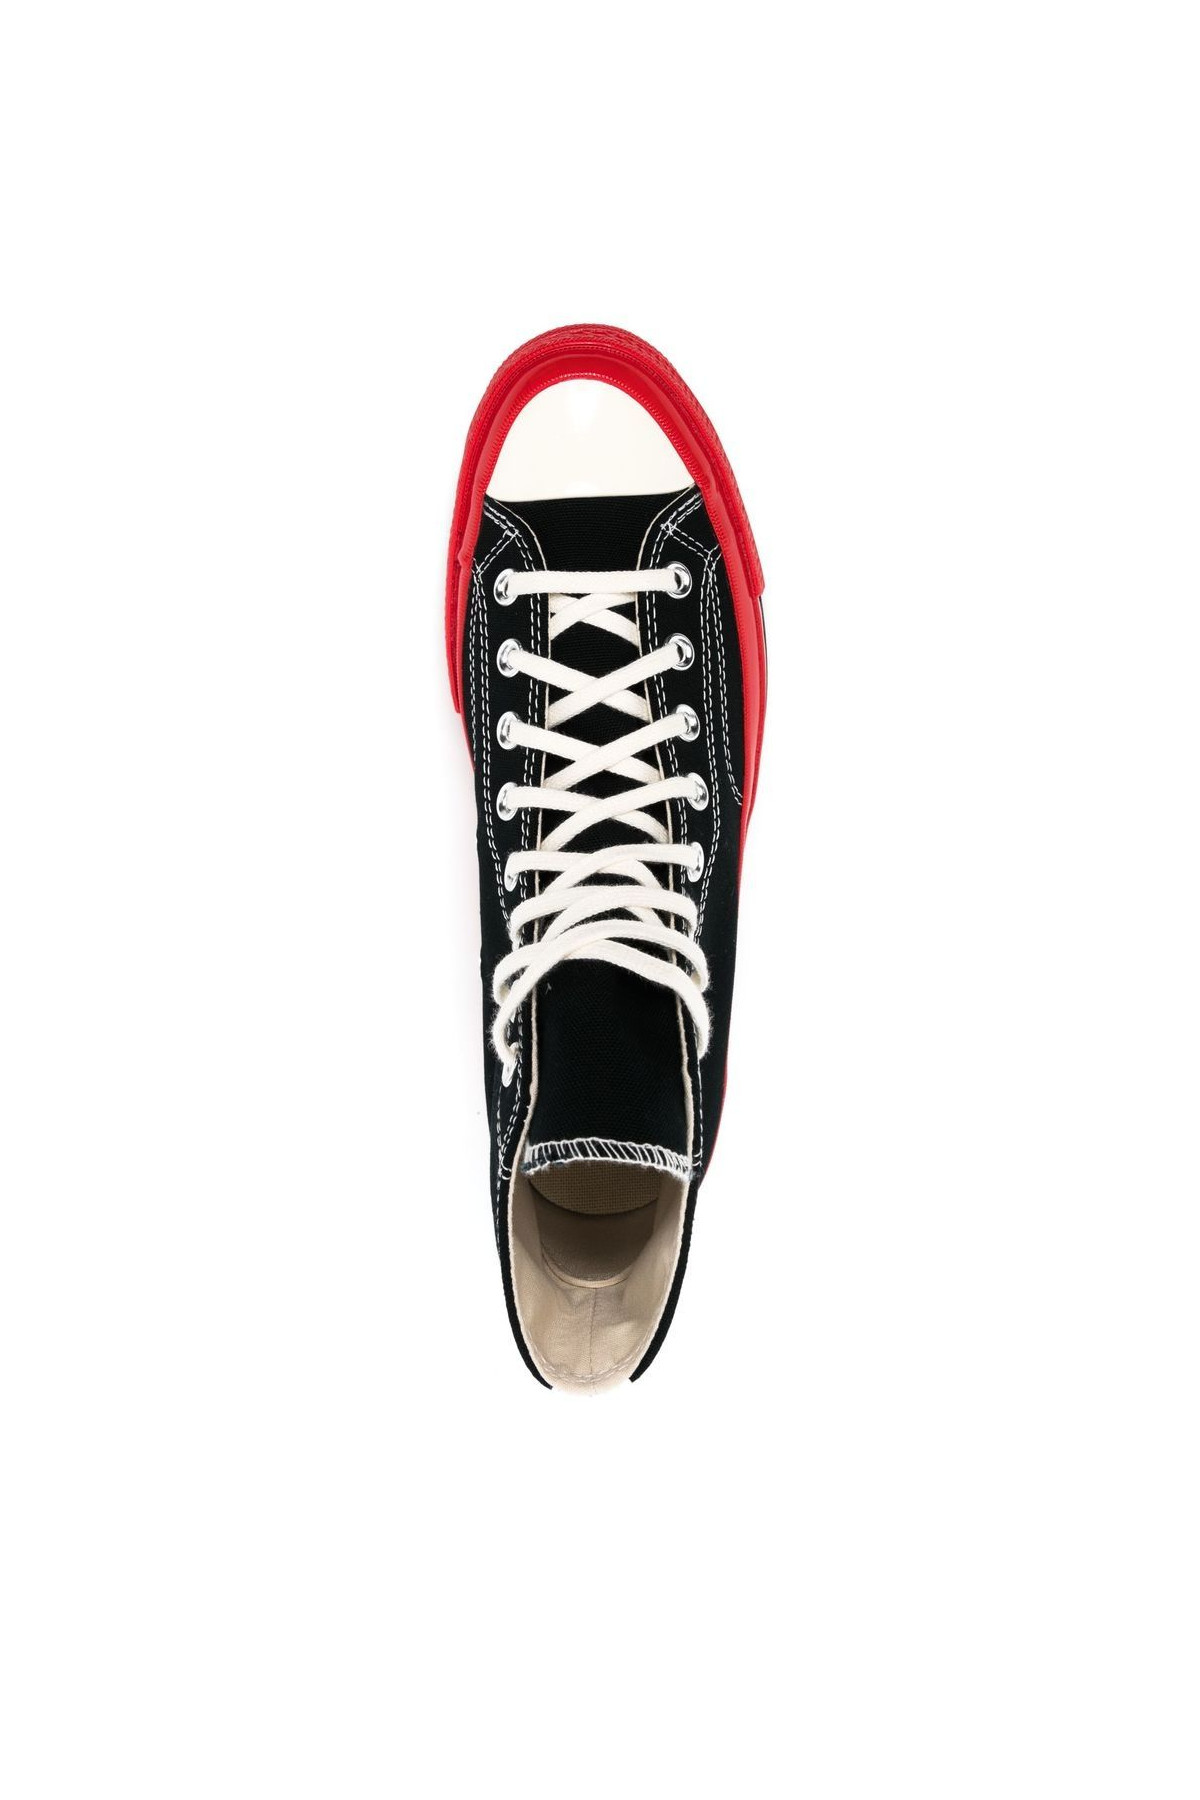 Play Converse Chuck Taylor High Red Sole P1K124